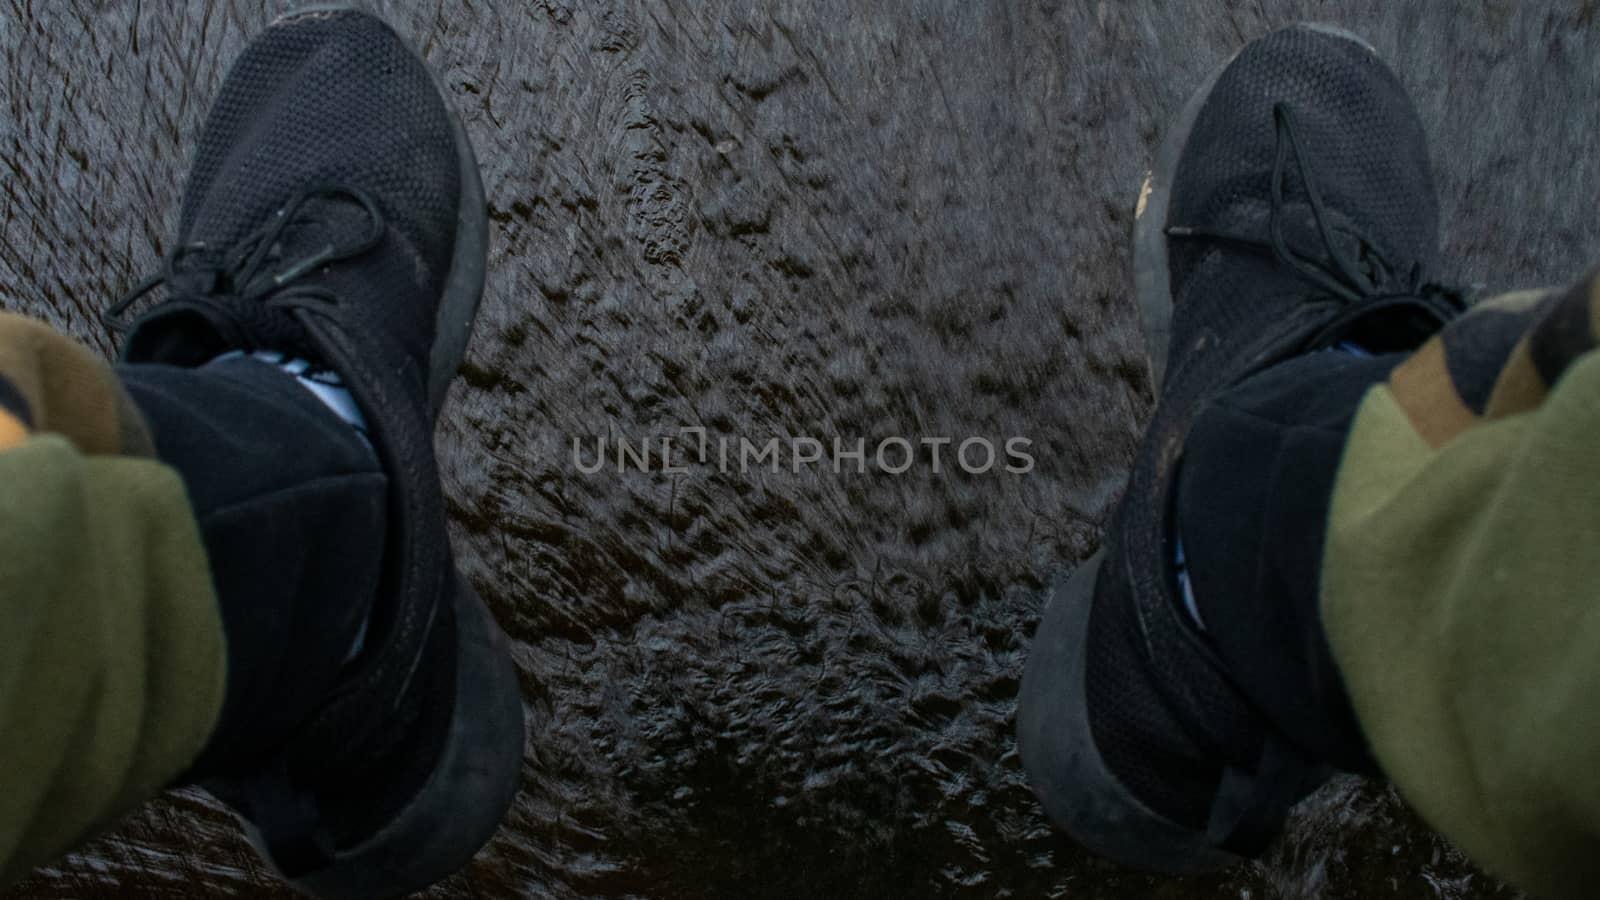 A Man's Feet in Black Running Shoes and Camo Pants Dangling Over Running Water